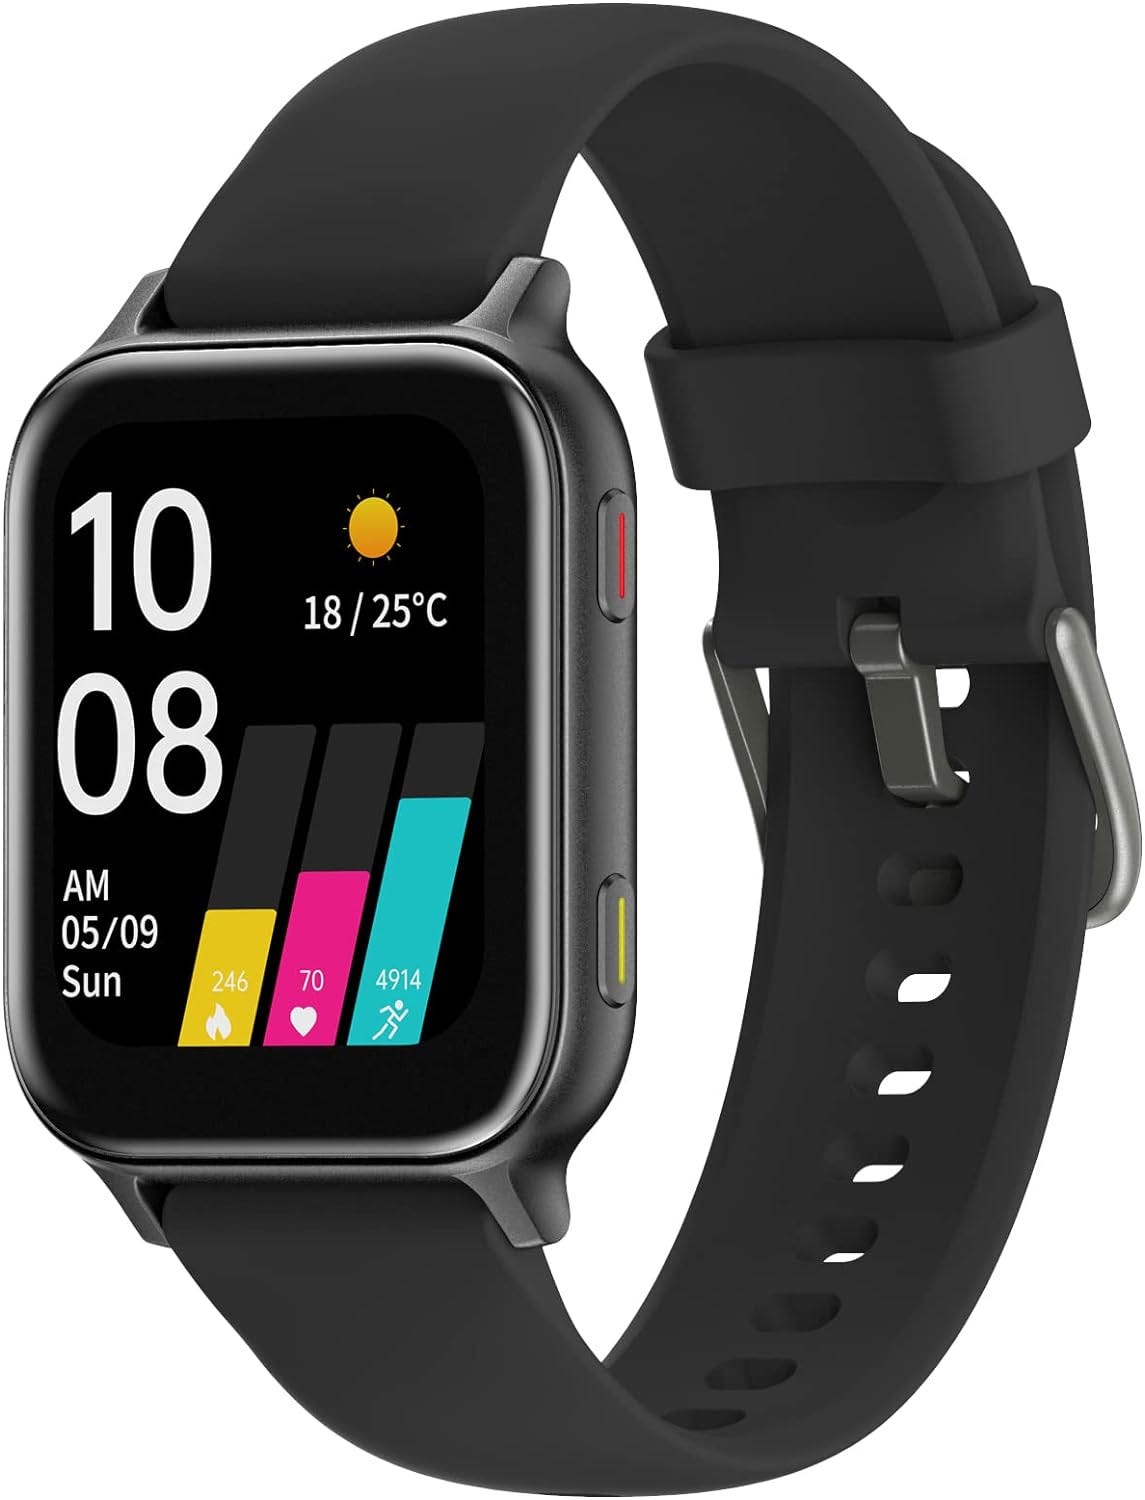 Modern umidigi smart watch For Fitness And Health 